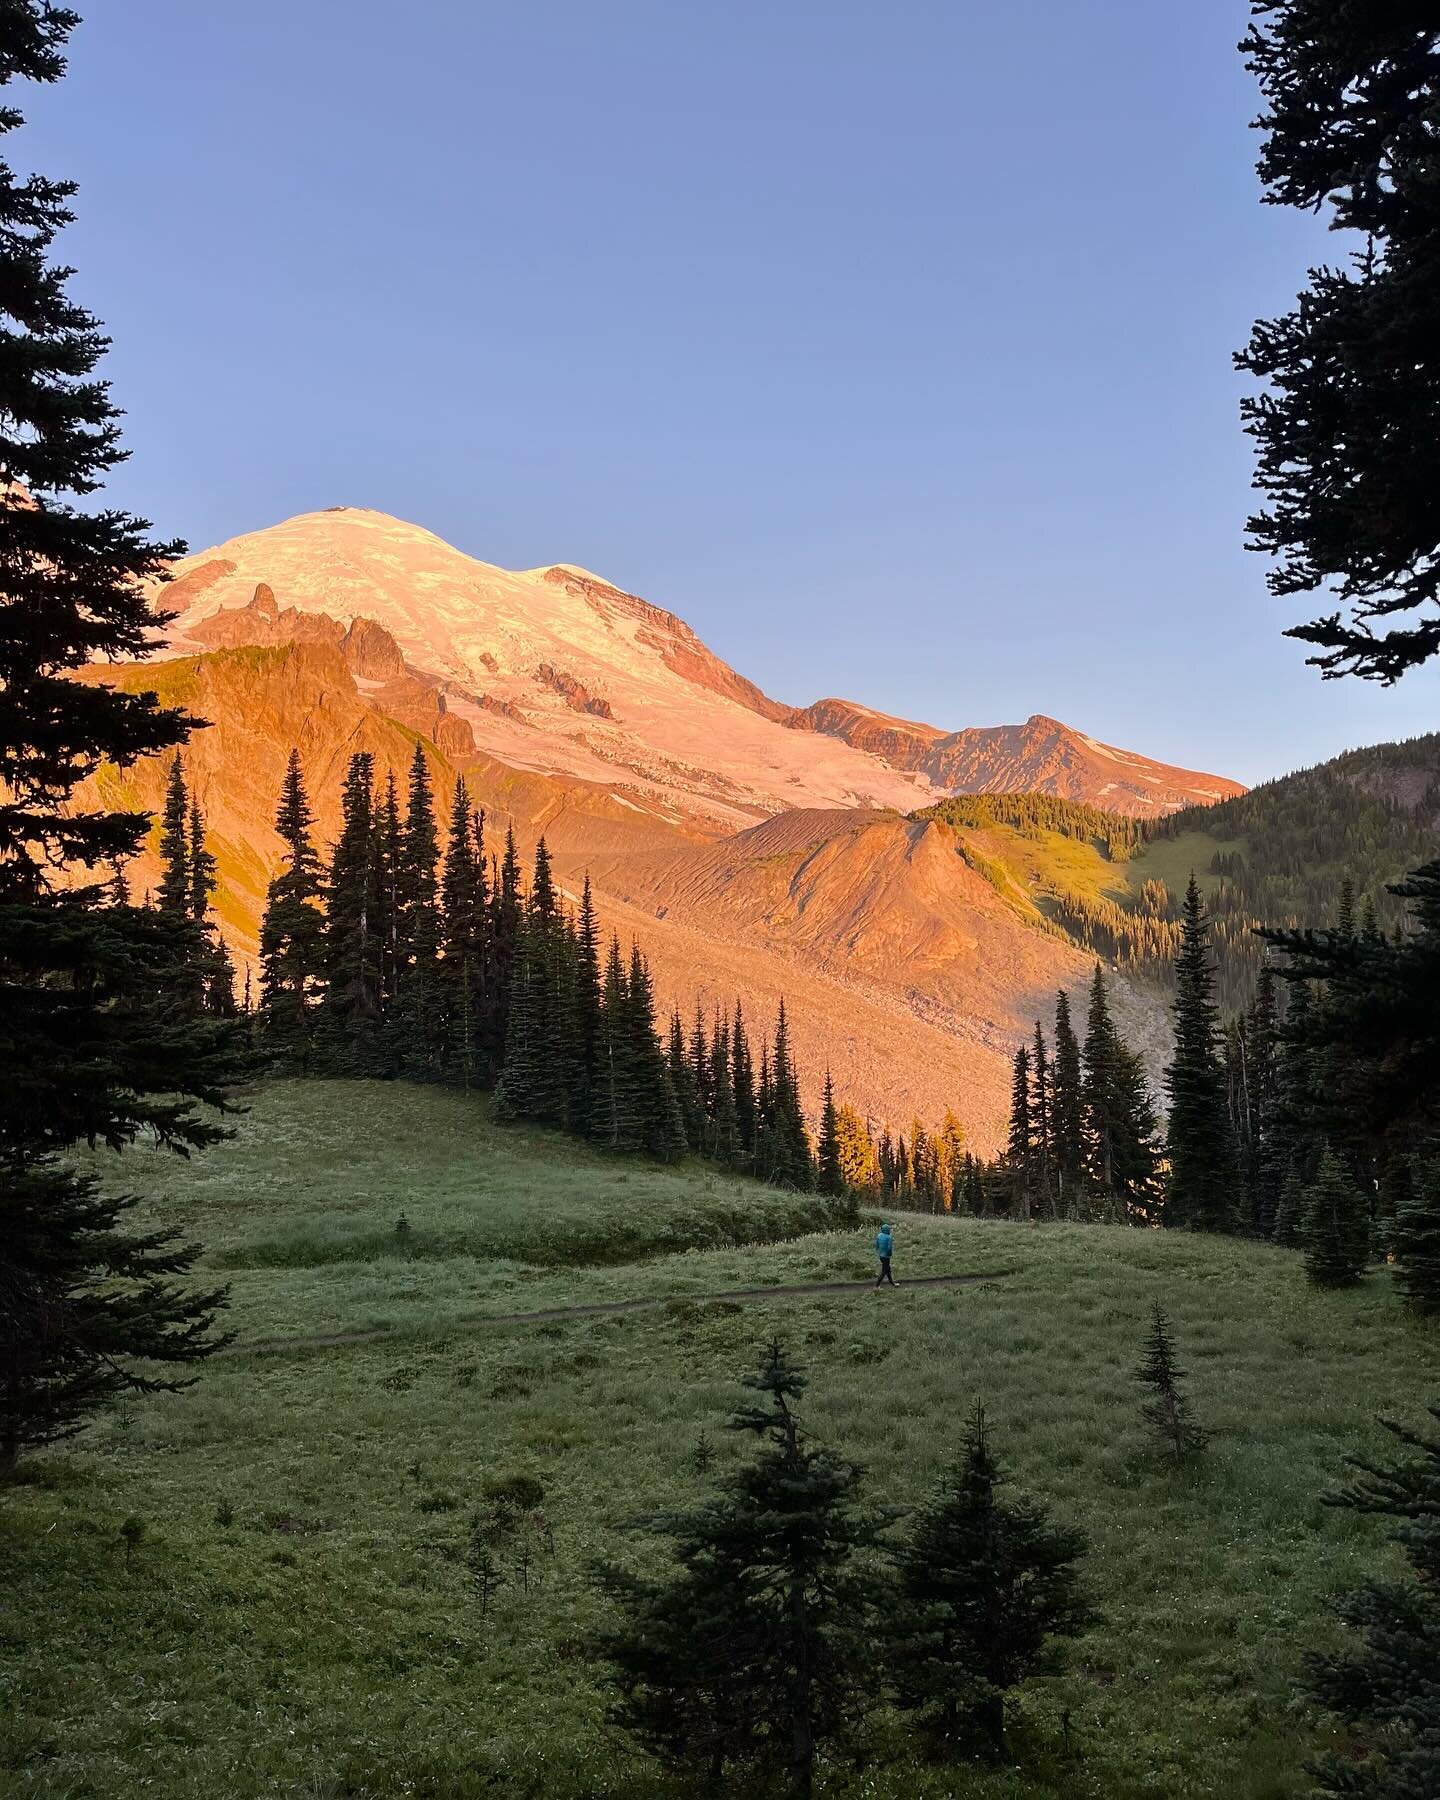 How does one even begin to describe the beauty of the Wonderland Trail? 8 days, 93 miles, circumnavigating the iconic Mt. Rainier that can be seen all the way from Seattle, looming over the skyline. 

The Wonderland Trail is the longest backpacking t